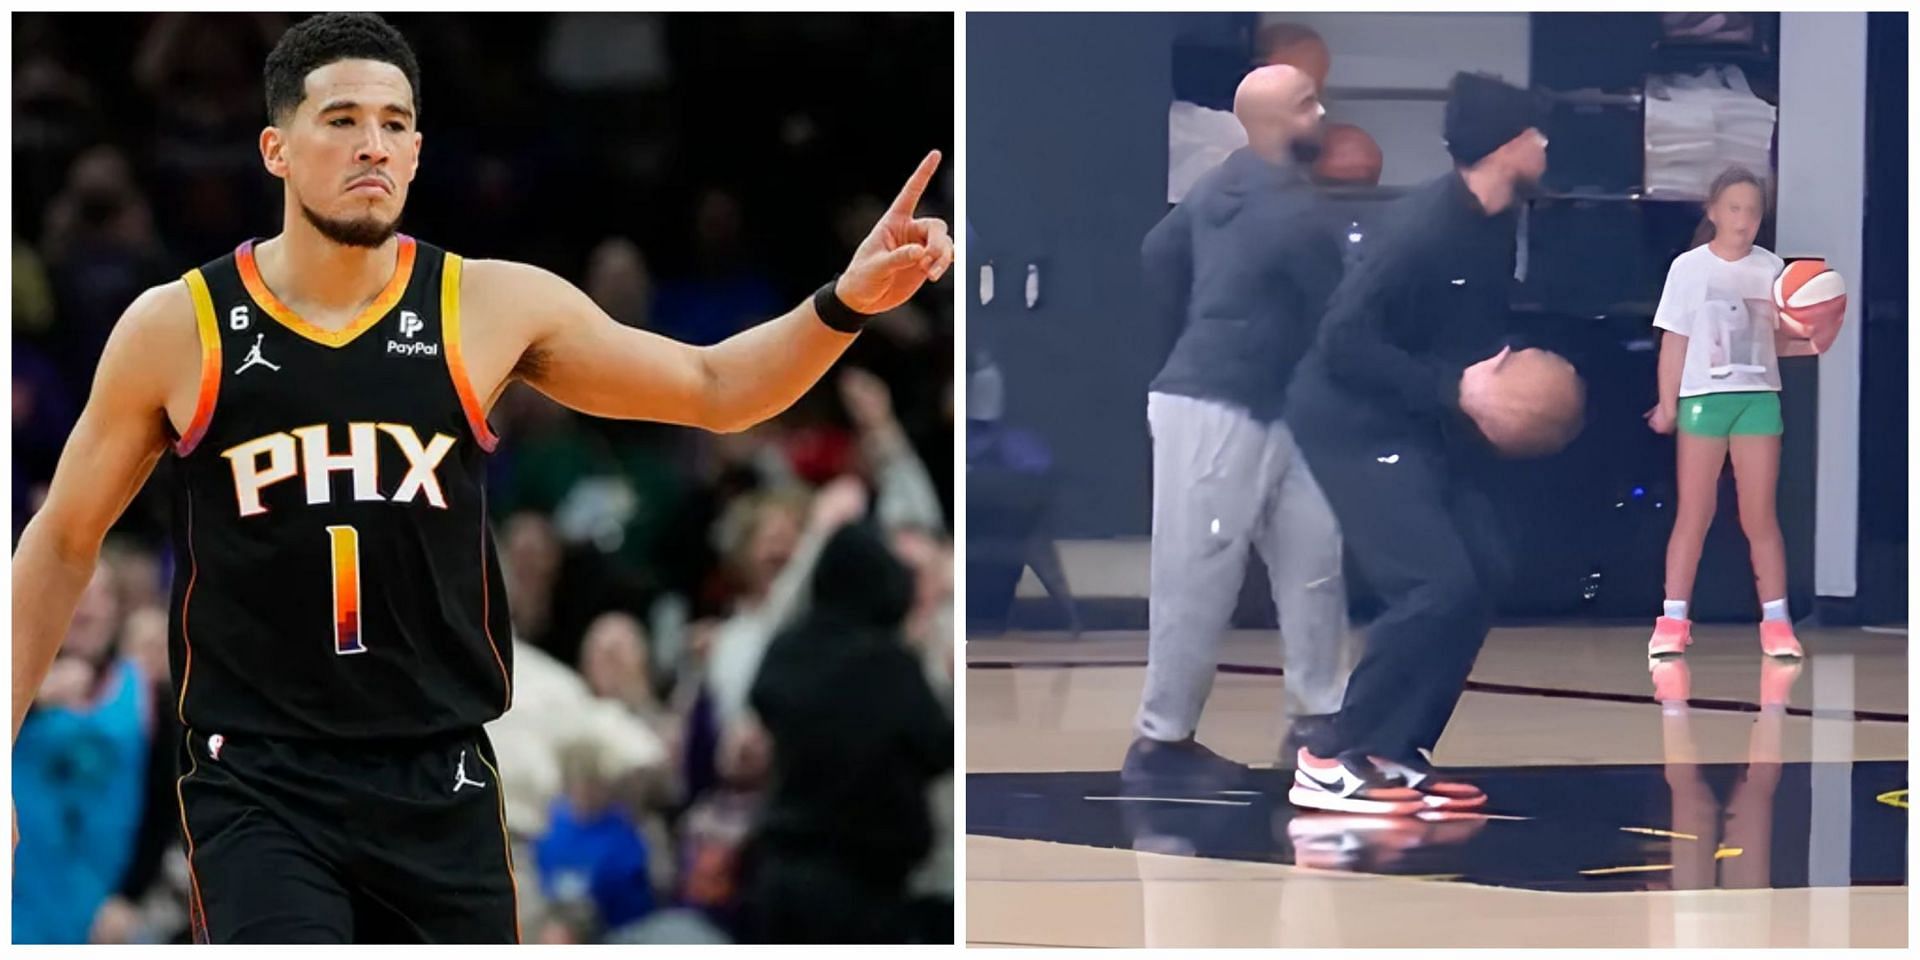 Devin Booker reveals an exclusive look at the upcoming Nike Book 1 colorway during warm-up before the game against the Hornets.